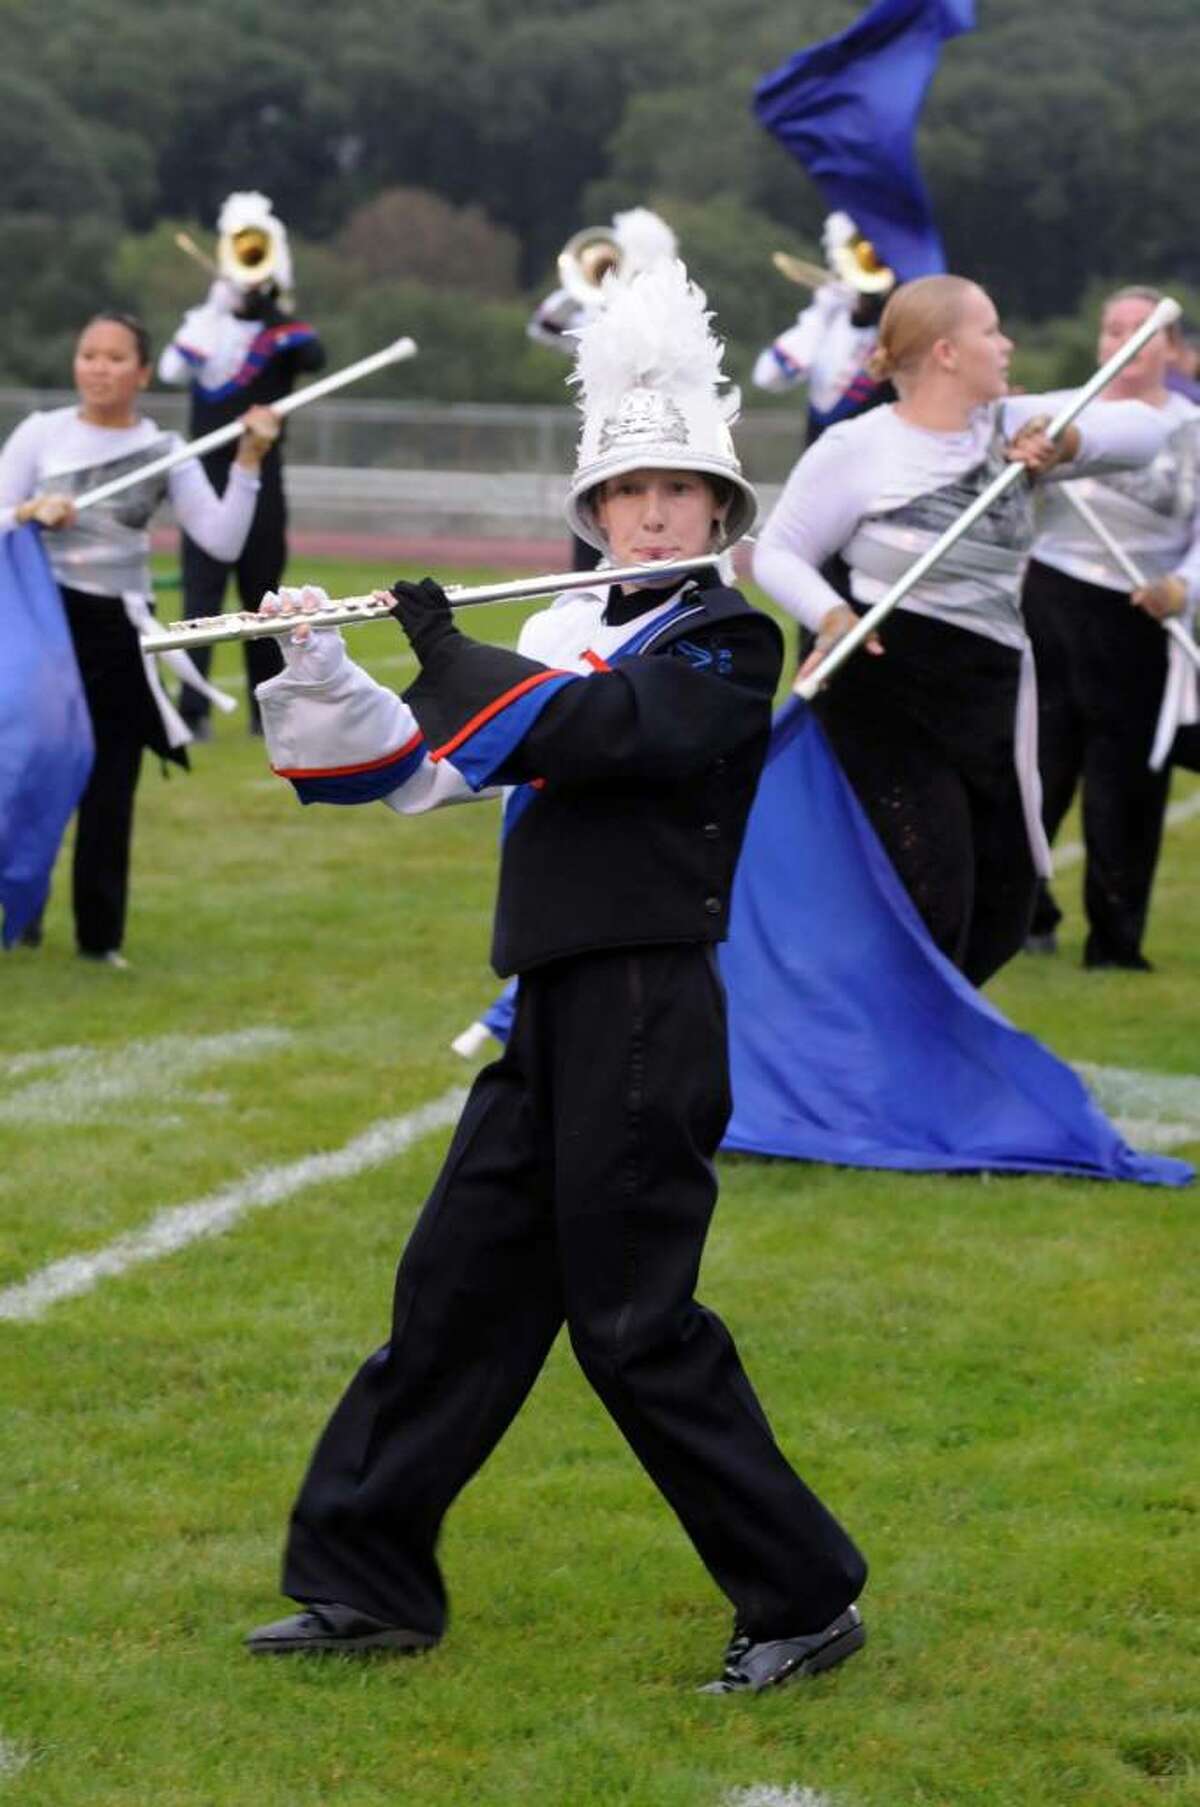 The Danbury High School Mad Hatter's Marching Band performs at the Bethel High School Wildcat Marching Band and Color Guard band competition "The Quest for the Best" on Friday evening Sept. 12, 2009. One of the bands flute players, Sheila Kennedy, stays focused on the performance.